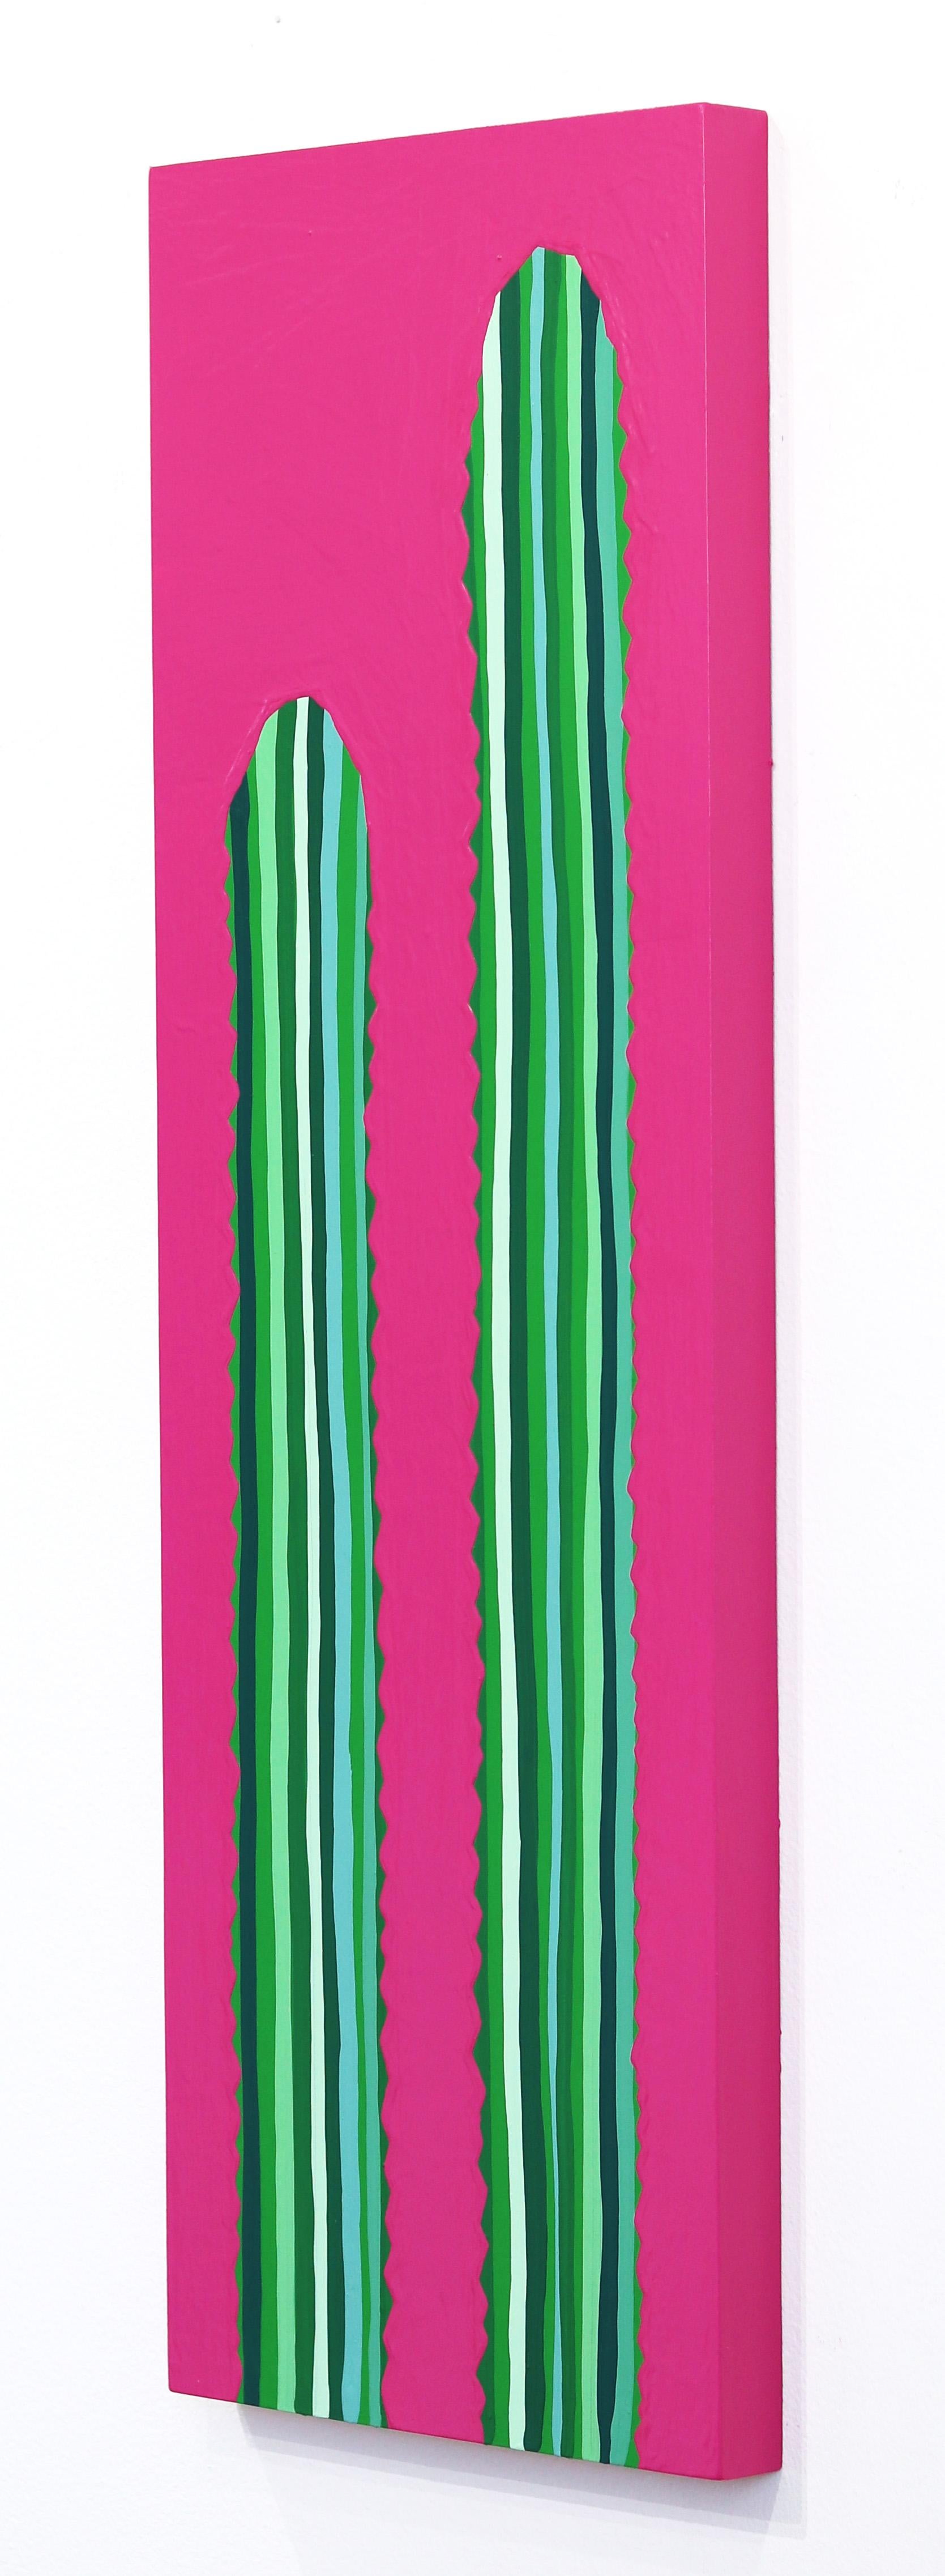 Rosa Picante - Vibrant Pink Green Southwest Inspired Pop Art Cactus Painting For Sale 2